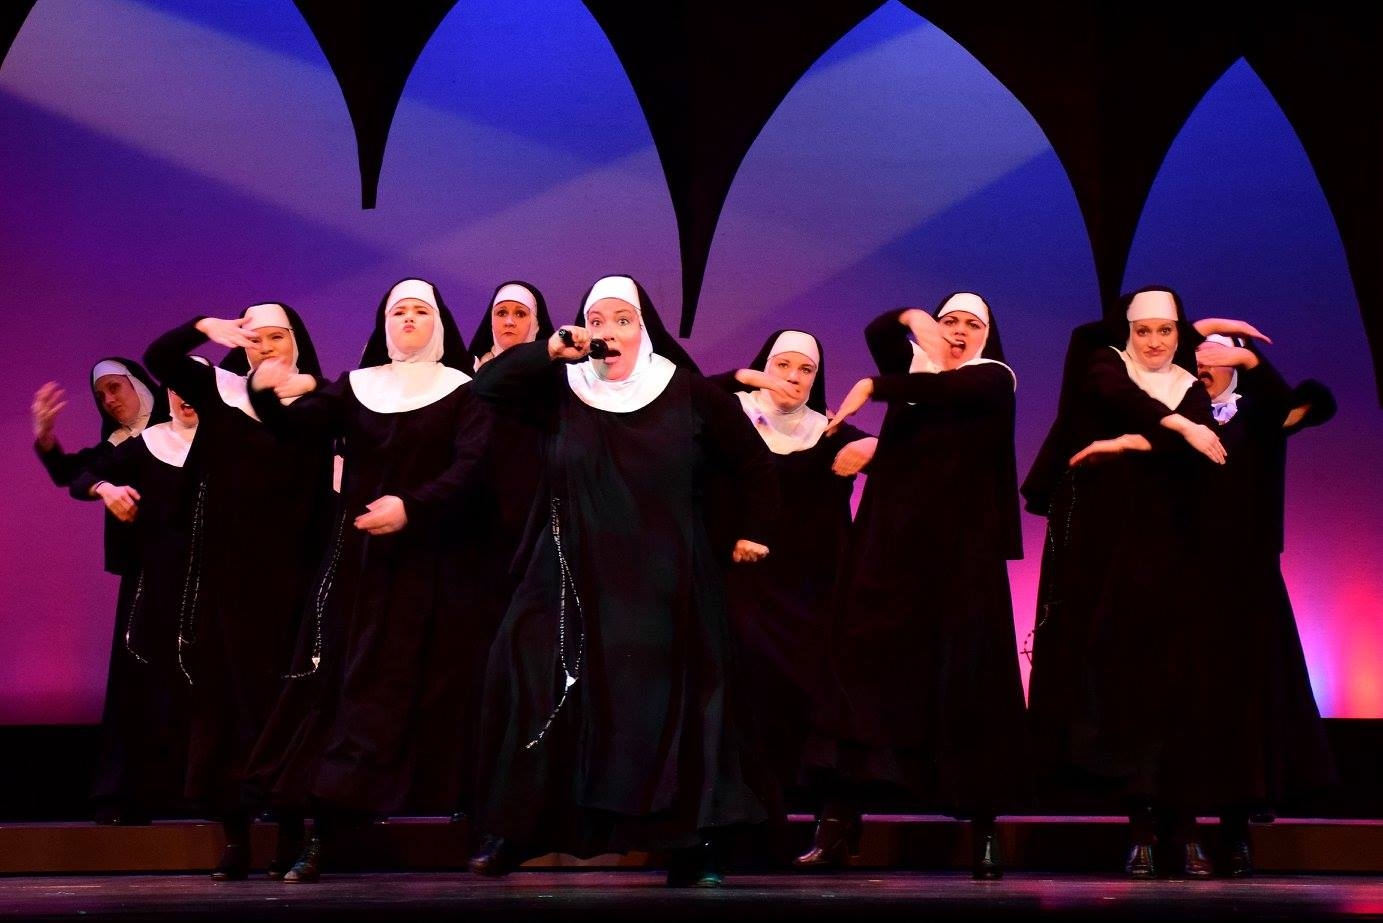 Review: Kalamazoo Civic Theatre goes above and beyond with ‘Sister Act’